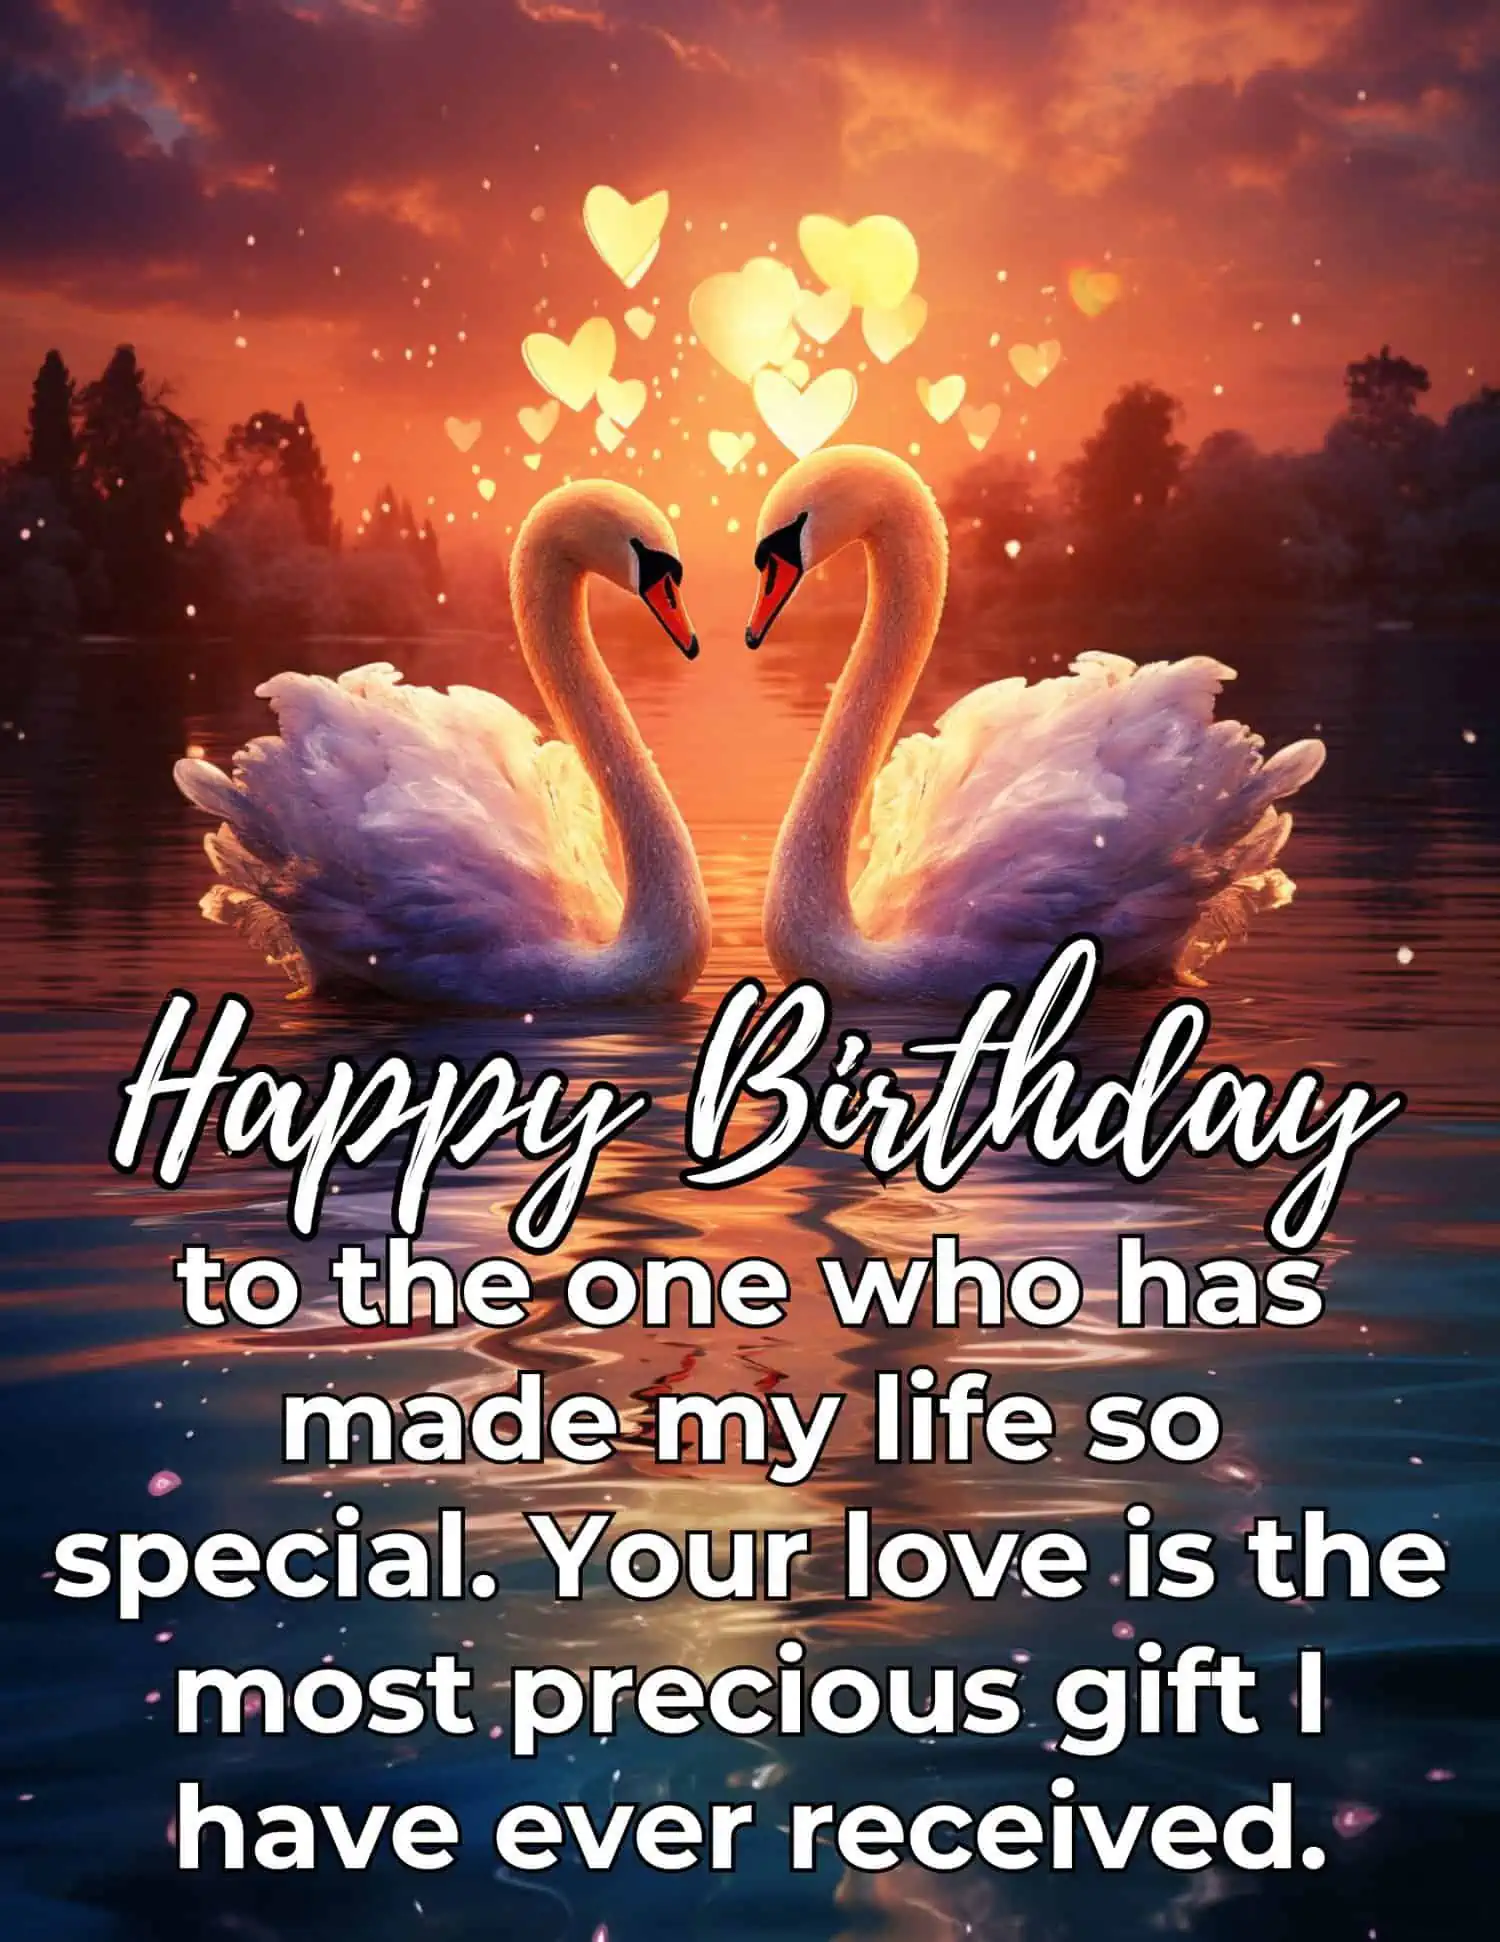 A collection of warm and heartfelt birthday wishes designed to make your girlfriend's special day even more memorable.